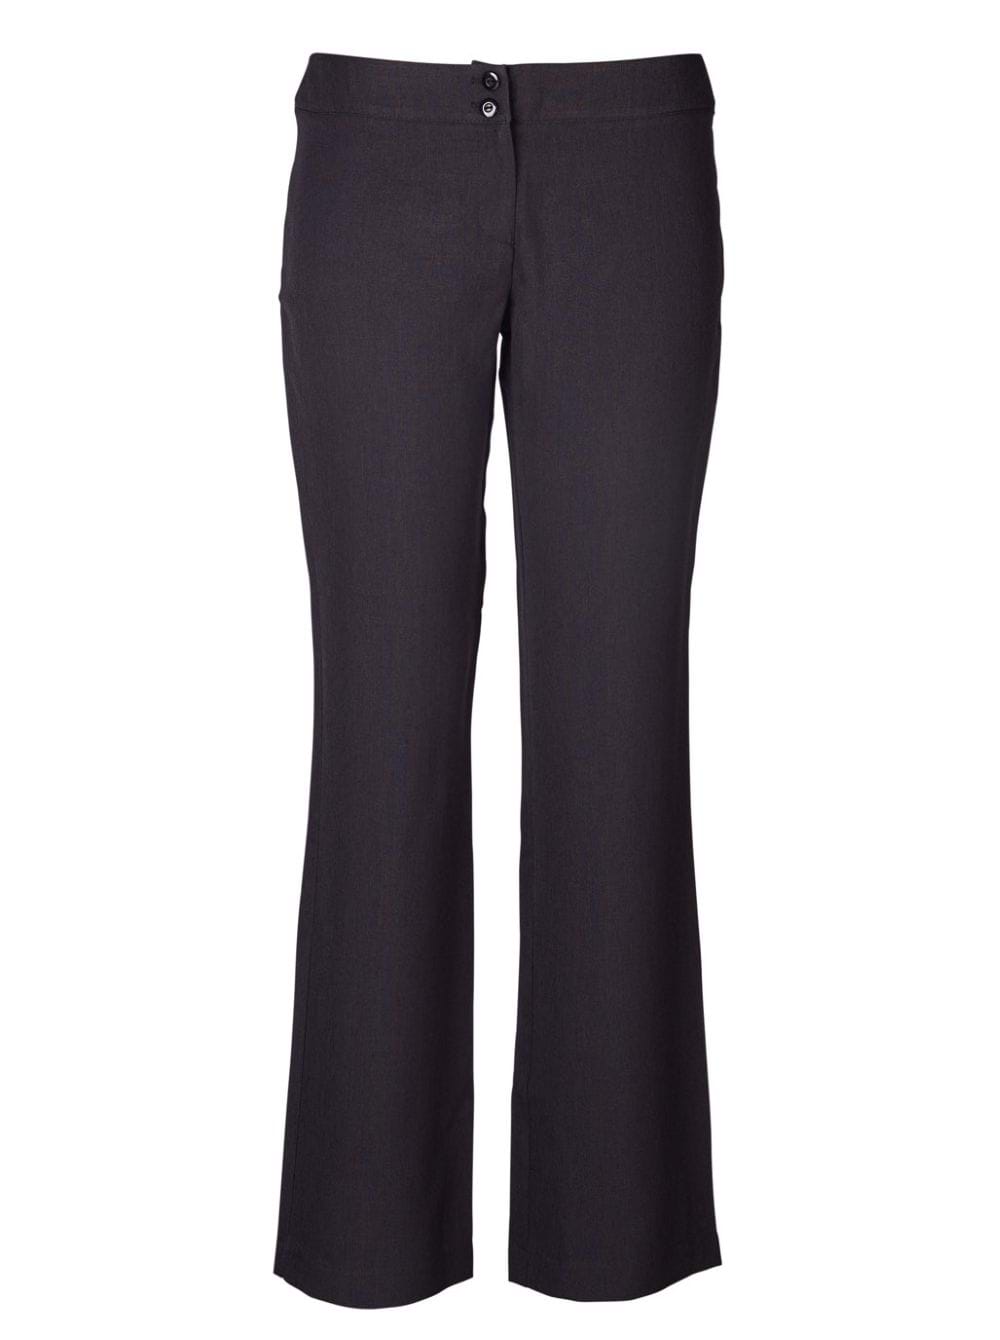 Susan Hipster Pants - Cationic Charcoal Grey / 38